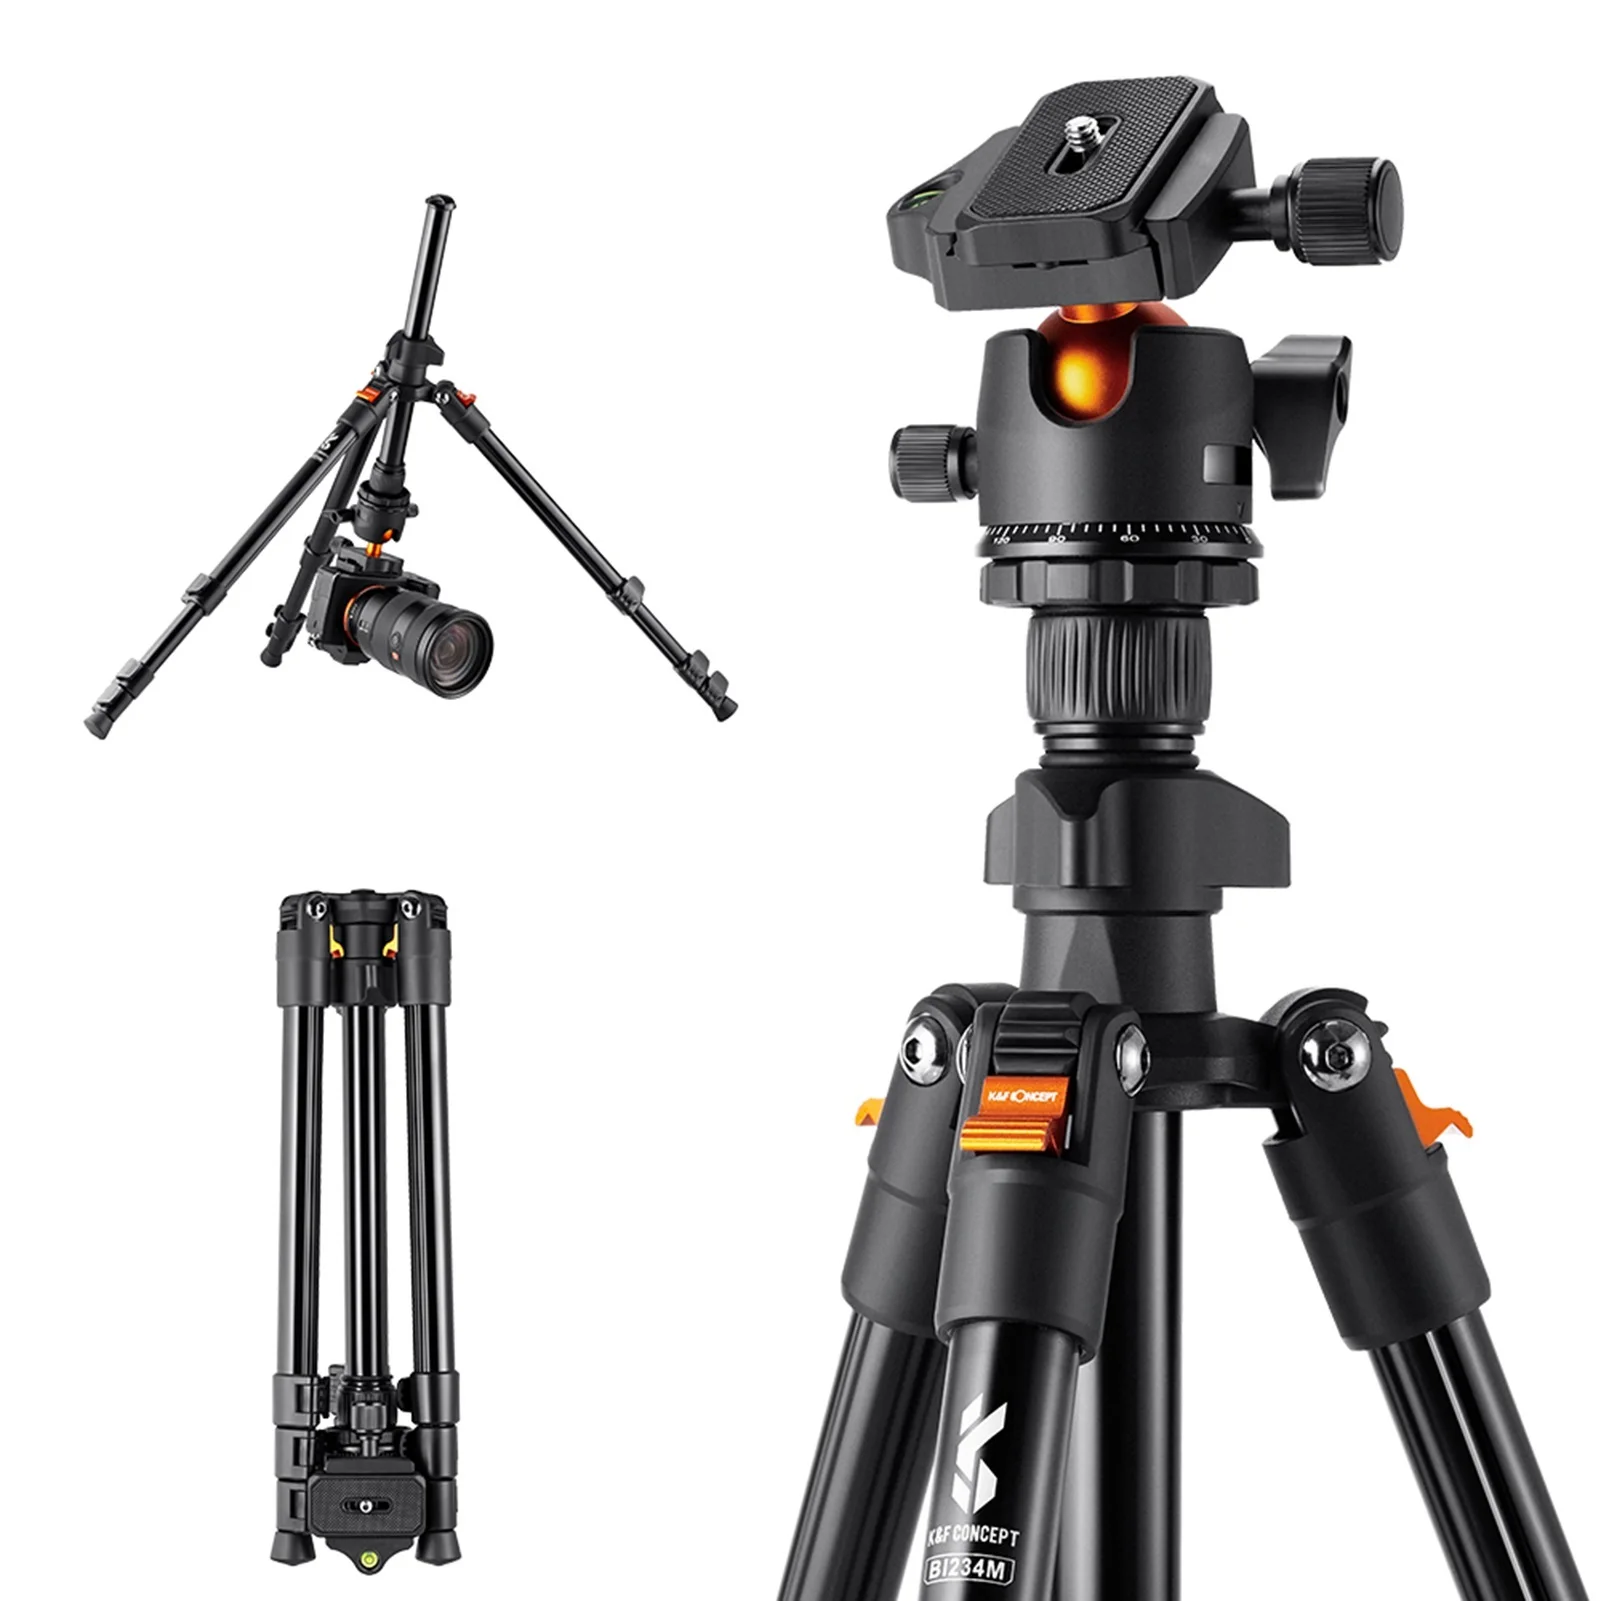 

Top 60cm Camera Tripod Stand Aluminum Alloy Photography Low Angle Travel Tripod with Carrying Bag for DSLR Cameras